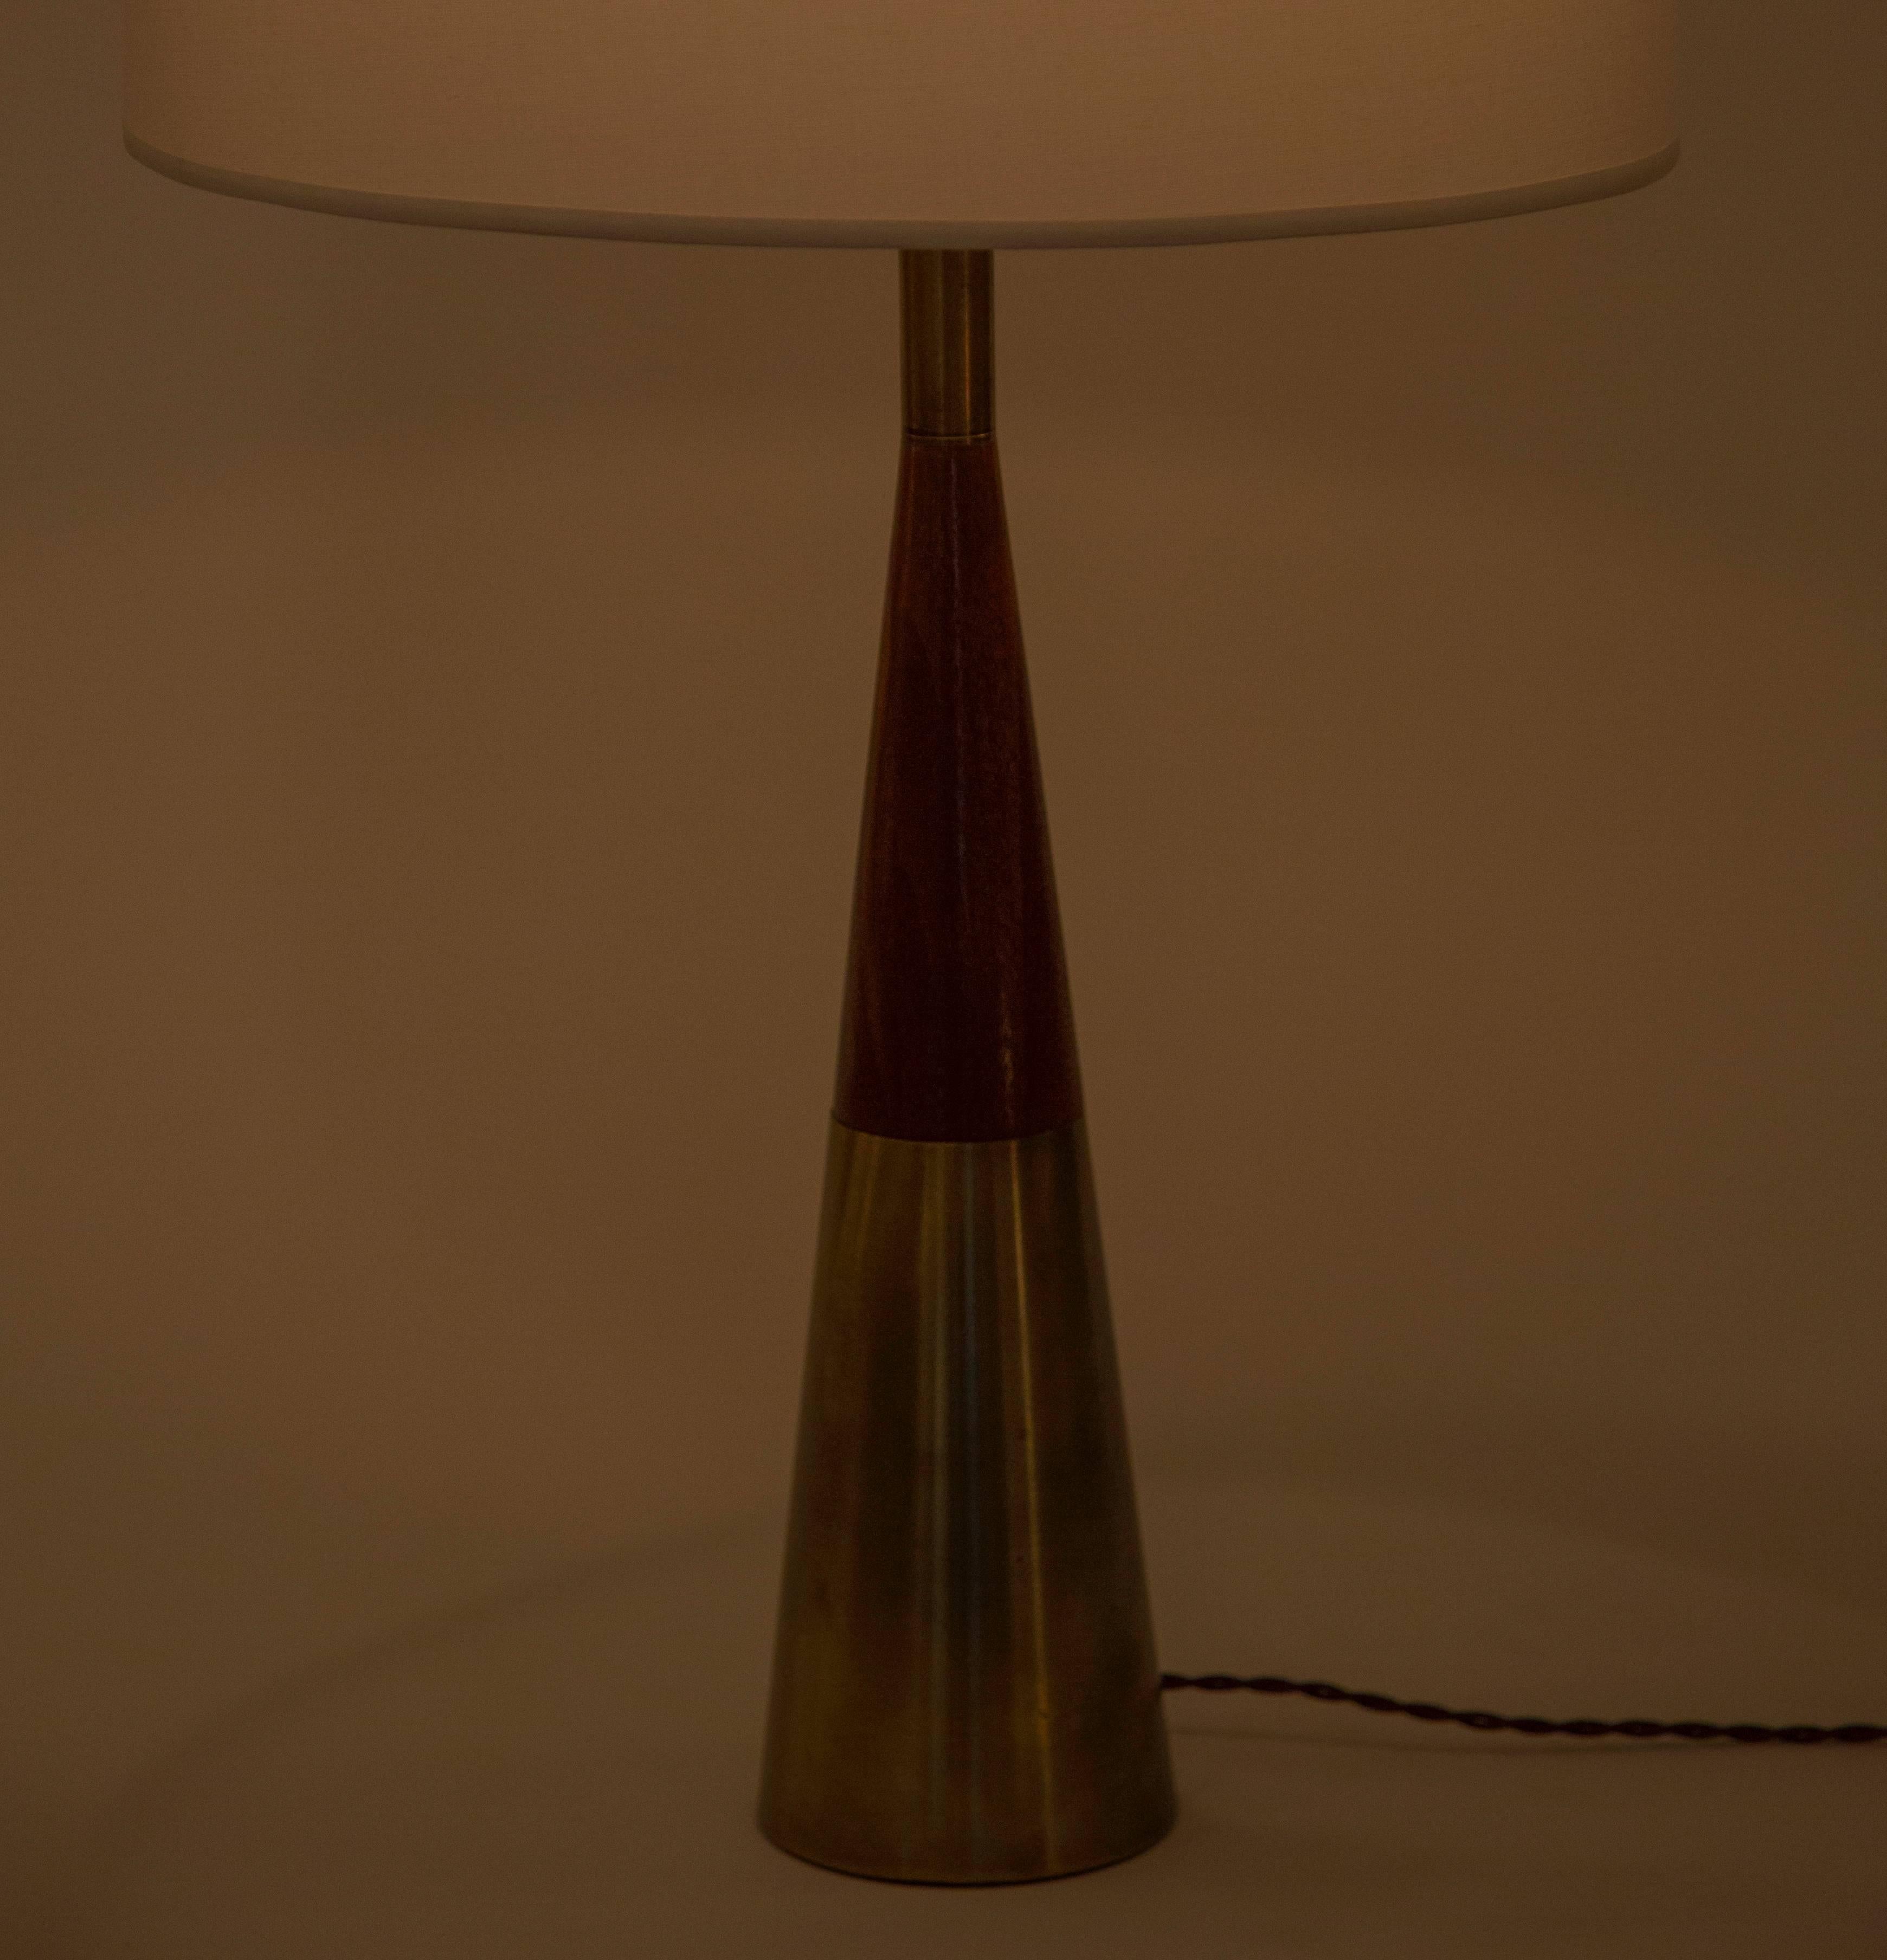 1950s Tony Paul Table Lamps for Westwood. Executed in patinated brass and solid walnut. Classic California Mid Century design.